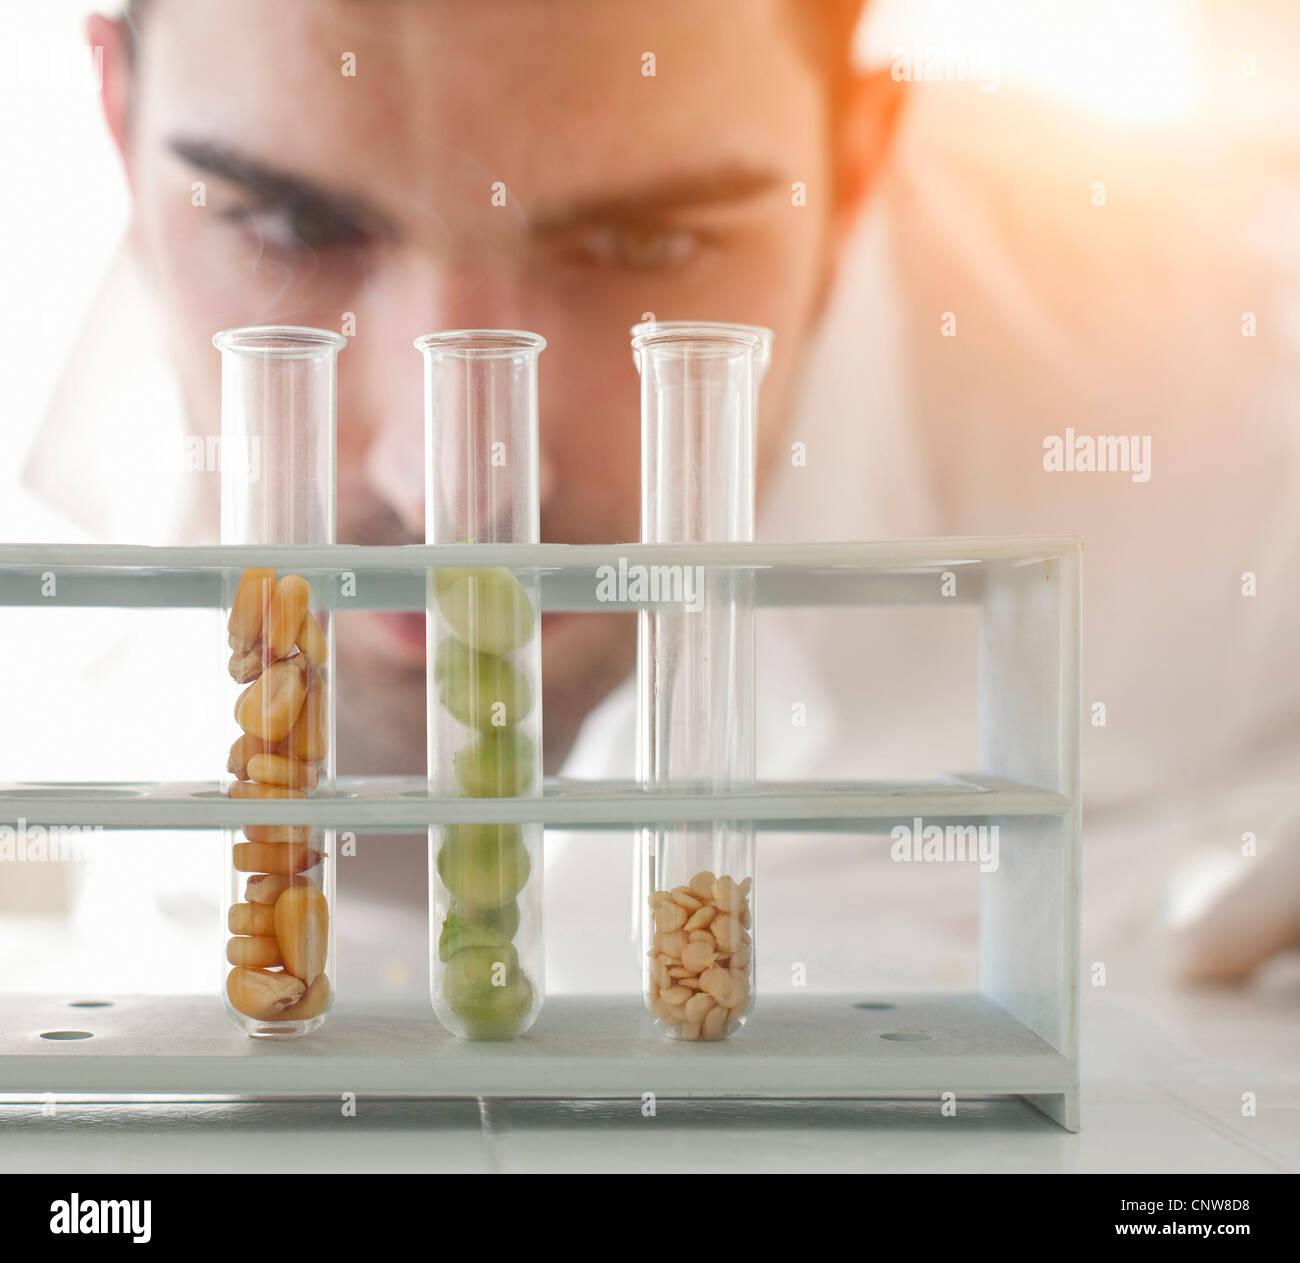 Scientist examining seeds in test tubes Stock Photo